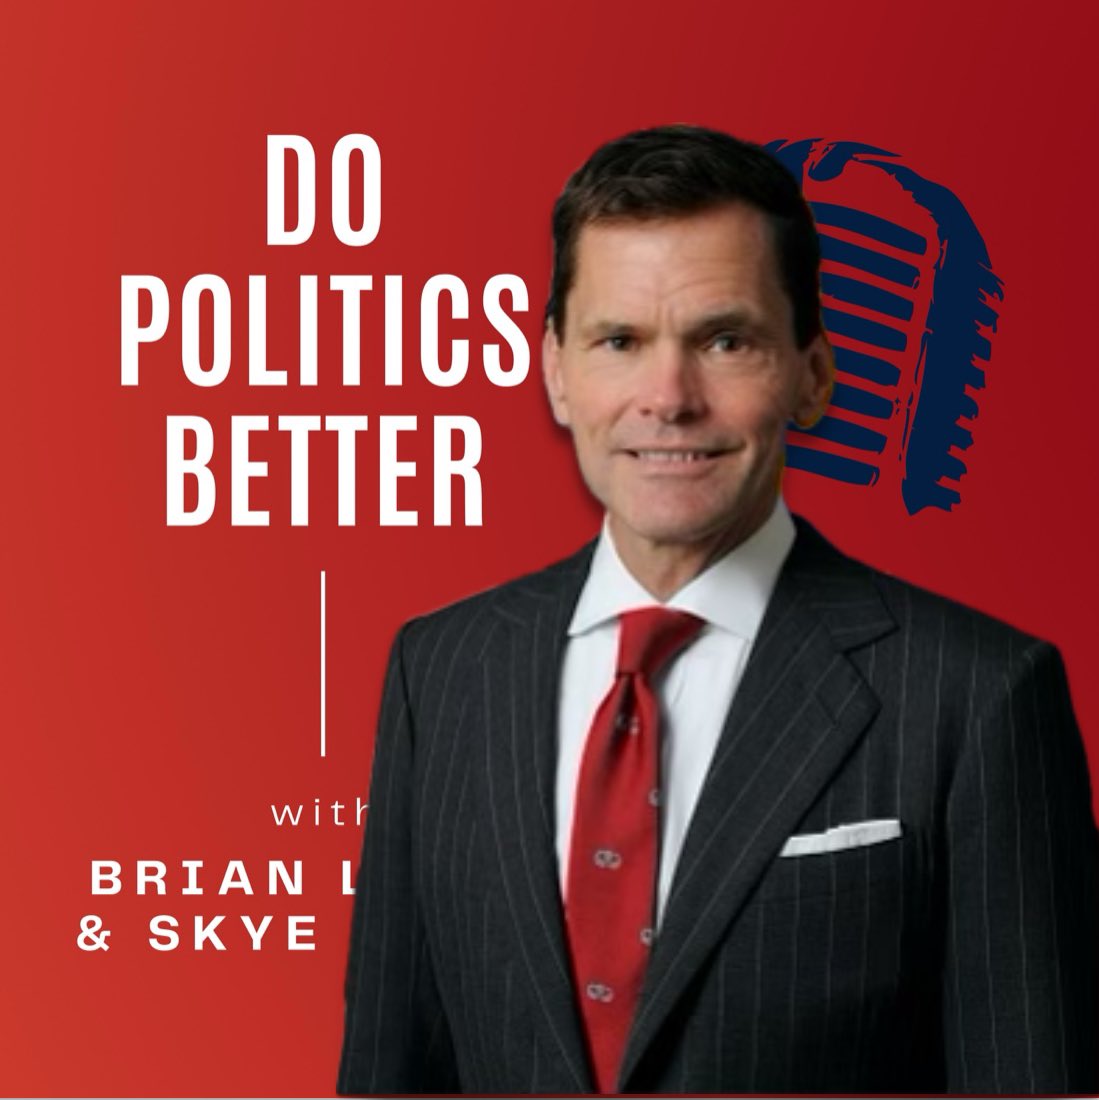 Start your week & #MemorialDay with NC Military & Veterans Affairs Secretary @GrierMartin. The former soldier & #ncga legislator opens up about challenges @NCDMVA faces & his vision for veterans living in NC. Plus @skydiving11 & I unpack #ncpol. podcasts.apple.com/us/podcast/do-…